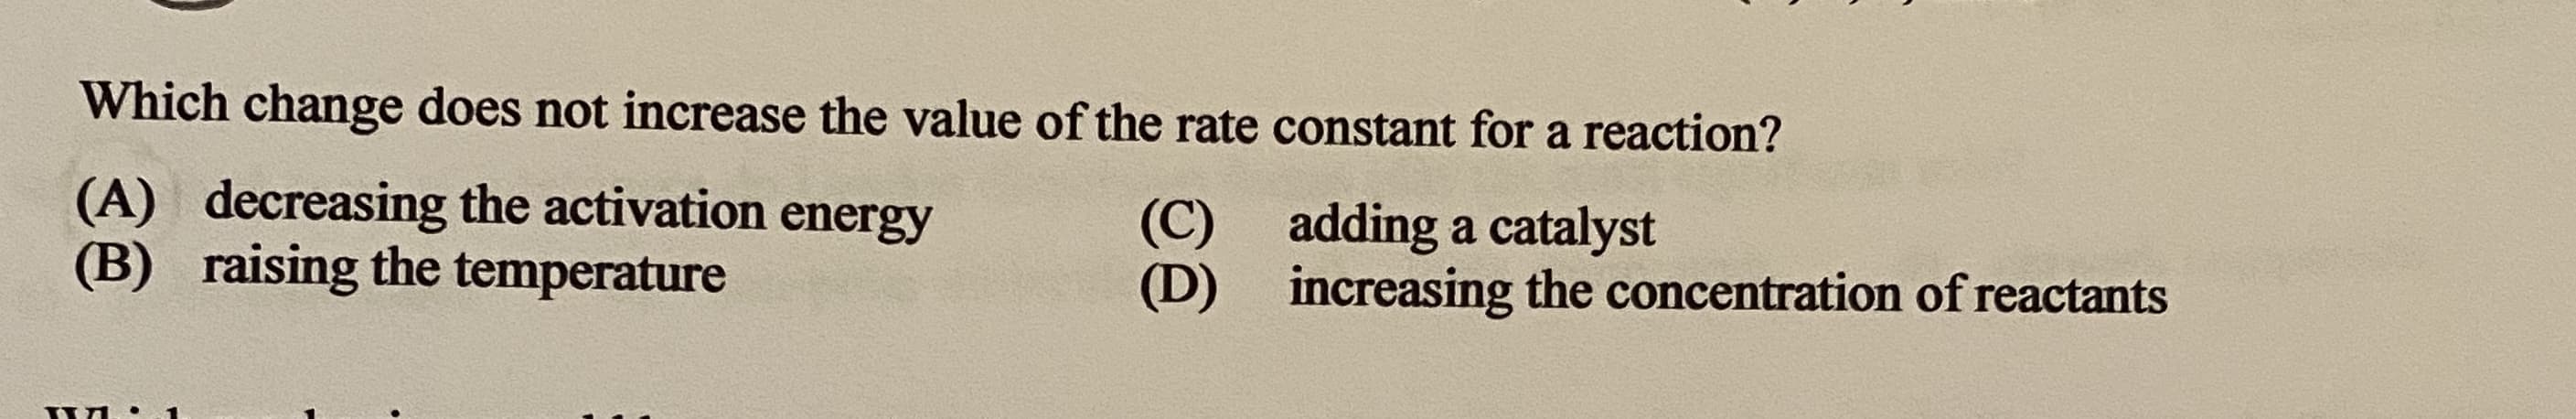 Which change does not increase the value of the rate constant for a reaction?
(A) decreasing the activation energy
(B) raising the temperature
(C)
adding a catalyst
increasing the concentration of reactants
